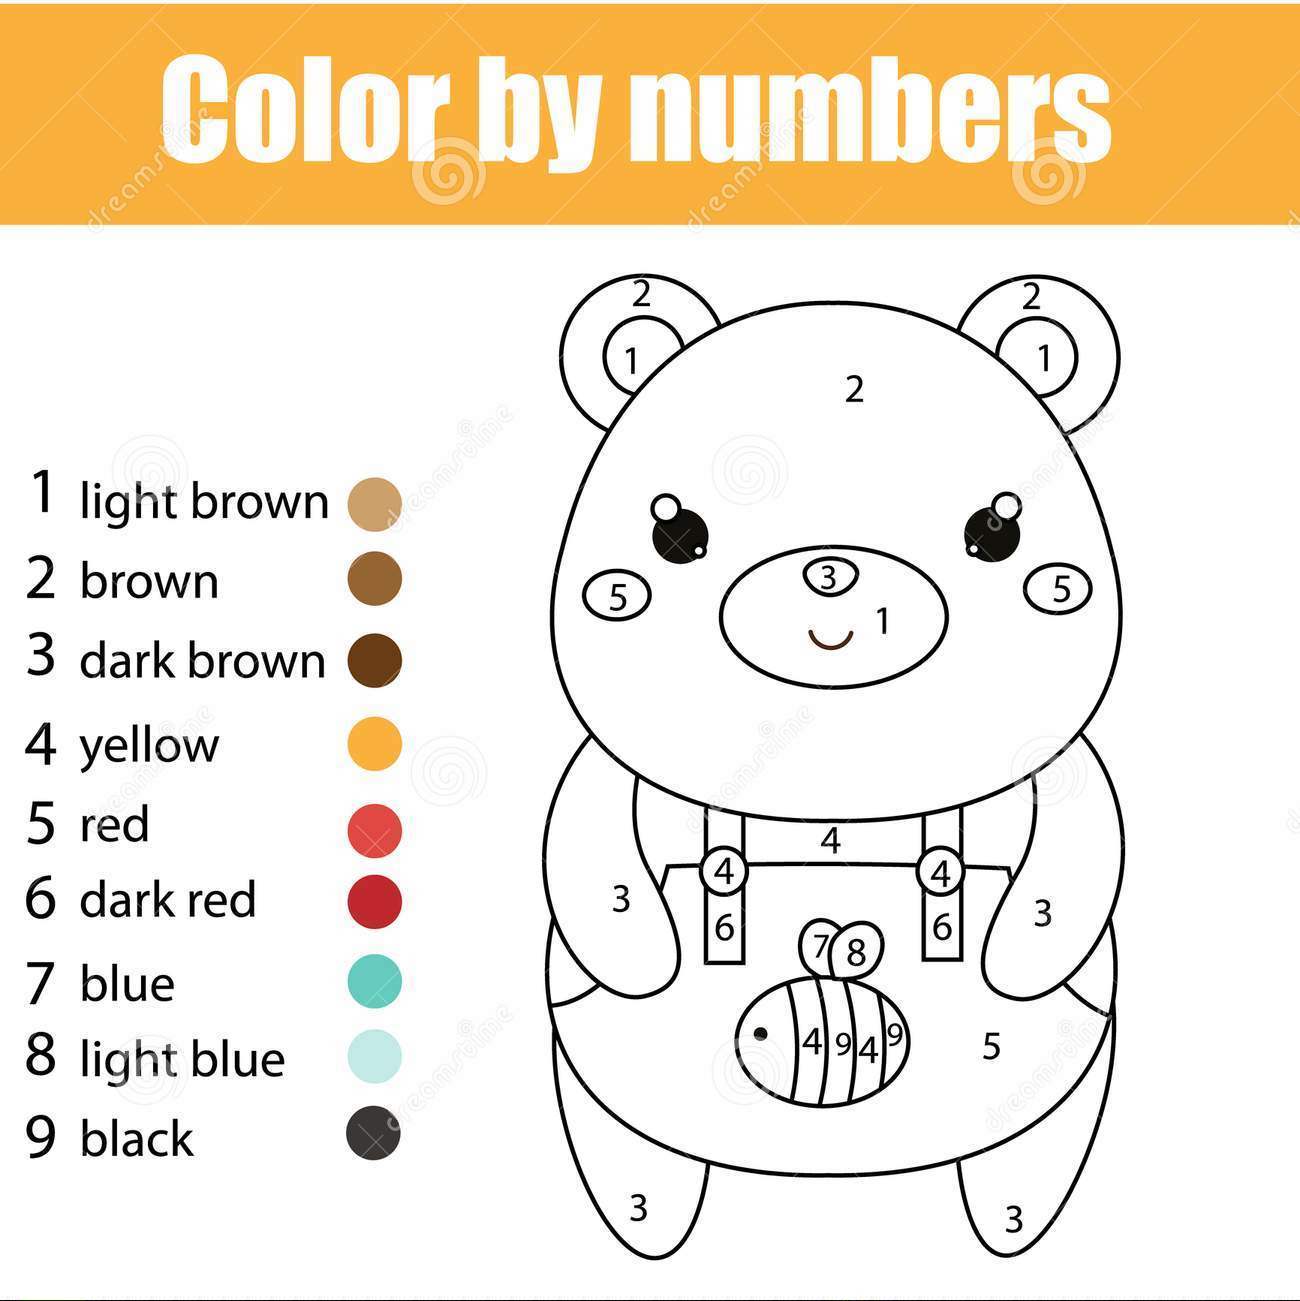 children-educational-game-coloring-page-cute-bear-color-numbers-printable-activity-children-educational-game-coloring-page-115041778.jpg